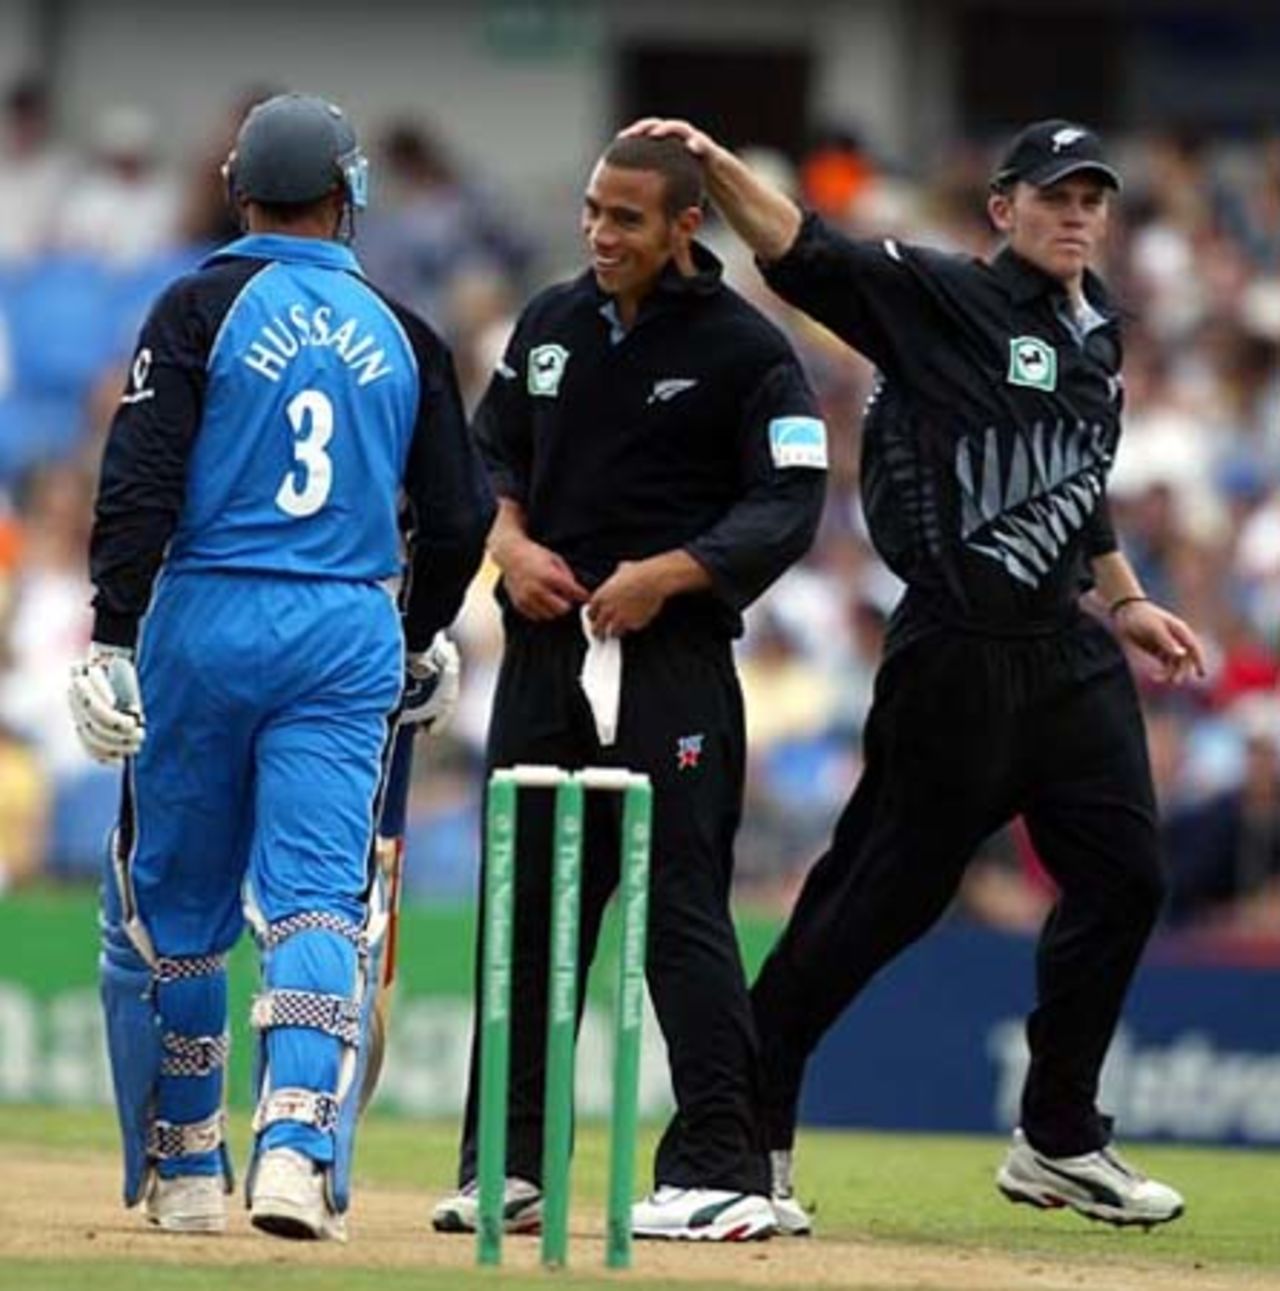 New Zealand bowler Andre Adams is patted on the head by team-mate Lou Vincent as he has a few words with England batsman Nasser Hussain at the end of an over during his spell of 0-36 from eight overs. 4th ODI: New Zealand v England at Eden Park, Auckland, 23 February 2002.